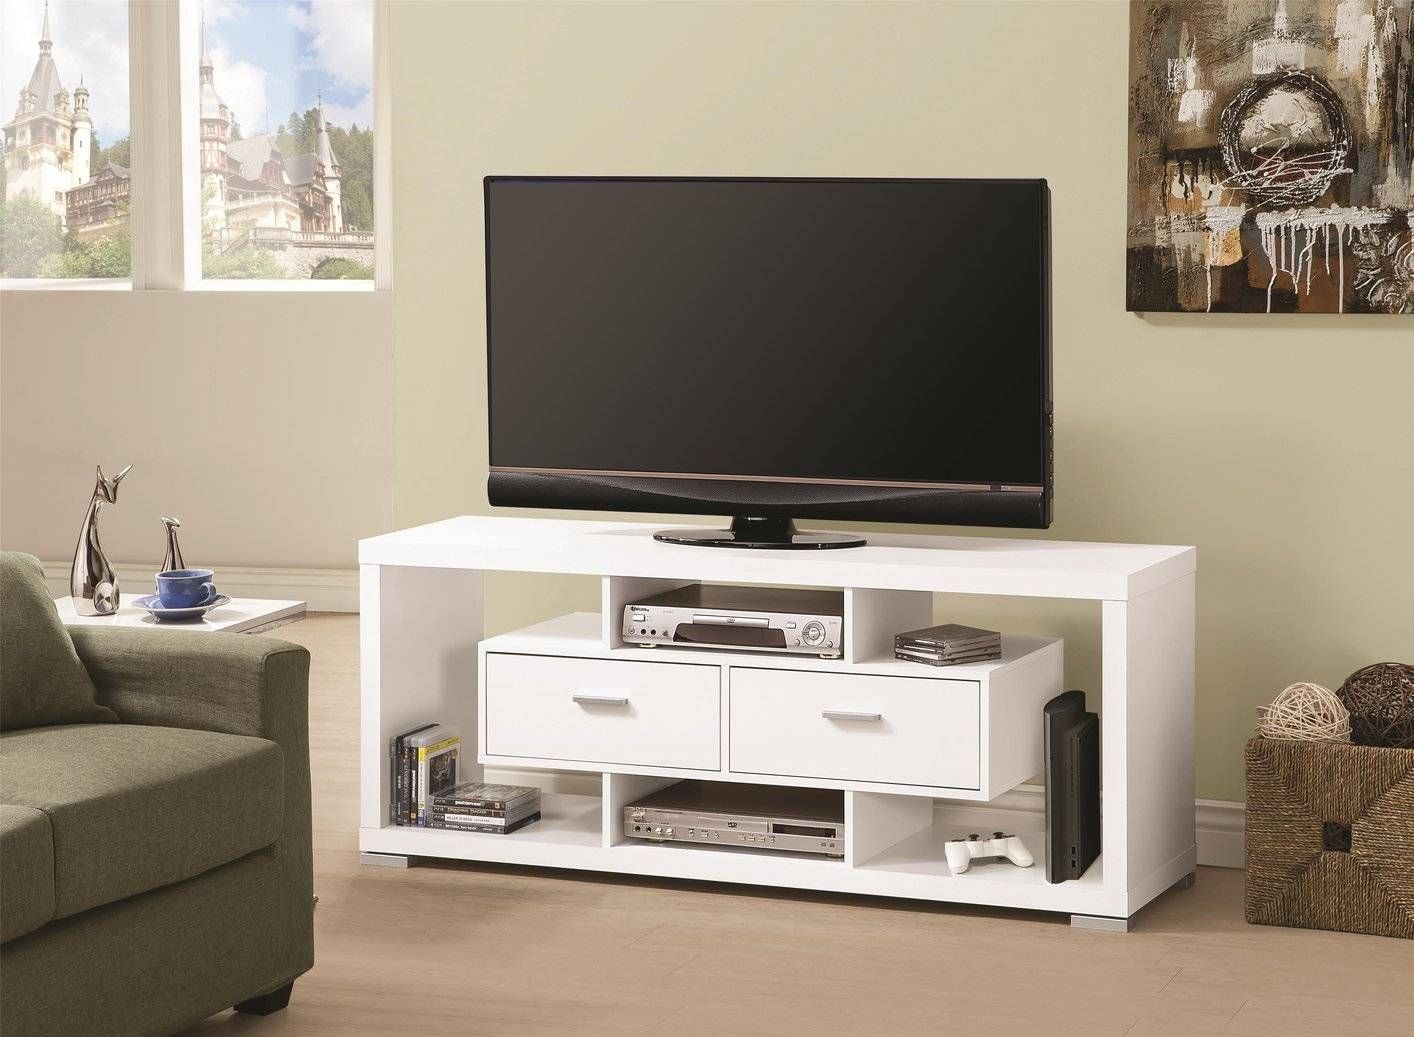 White Wood Tv Stand – Steal A Sofa Furniture Outlet Los Angeles Ca Pertaining To White Wood Tv Stands (View 4 of 15)